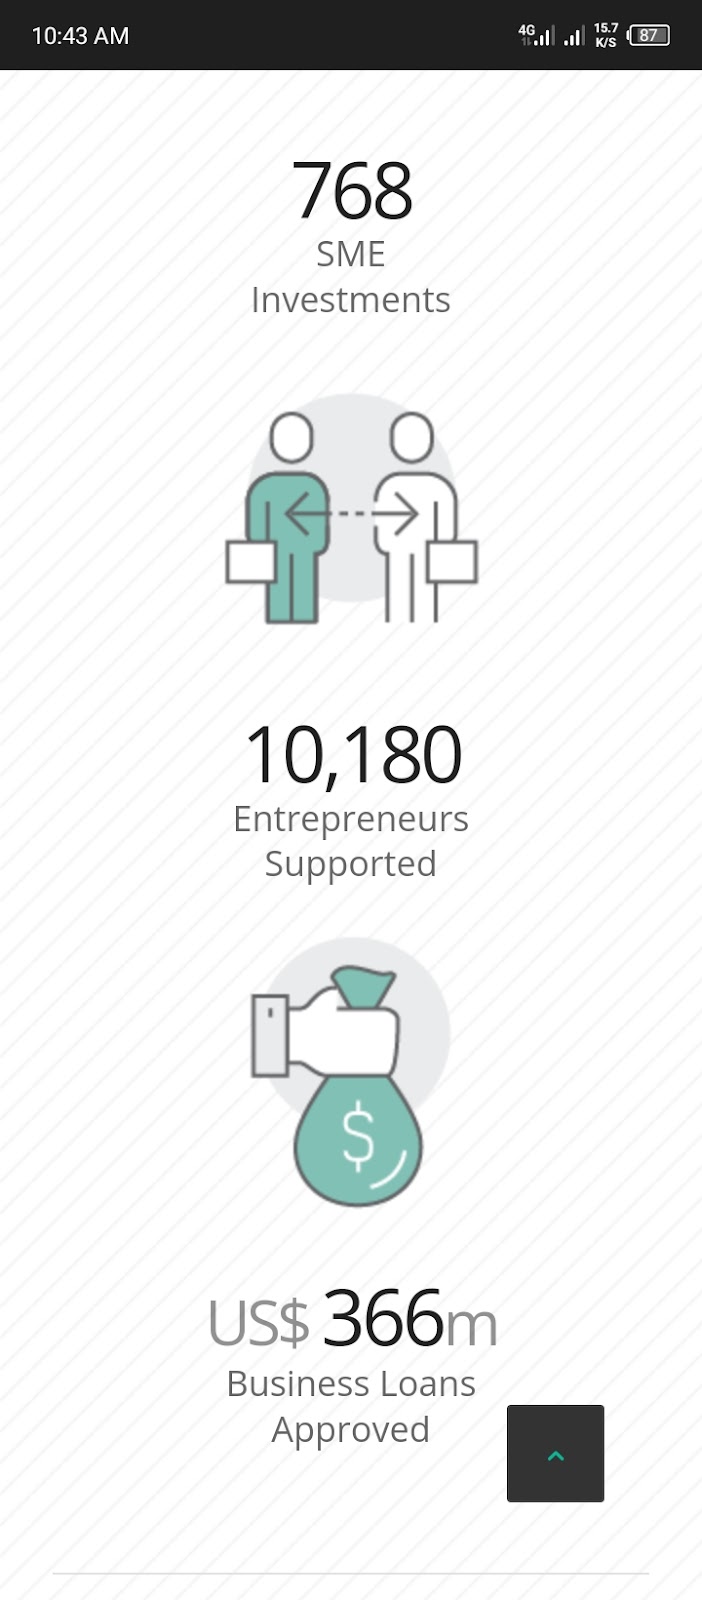 Image for GroFin Fund as one of the 11 grants for startups 